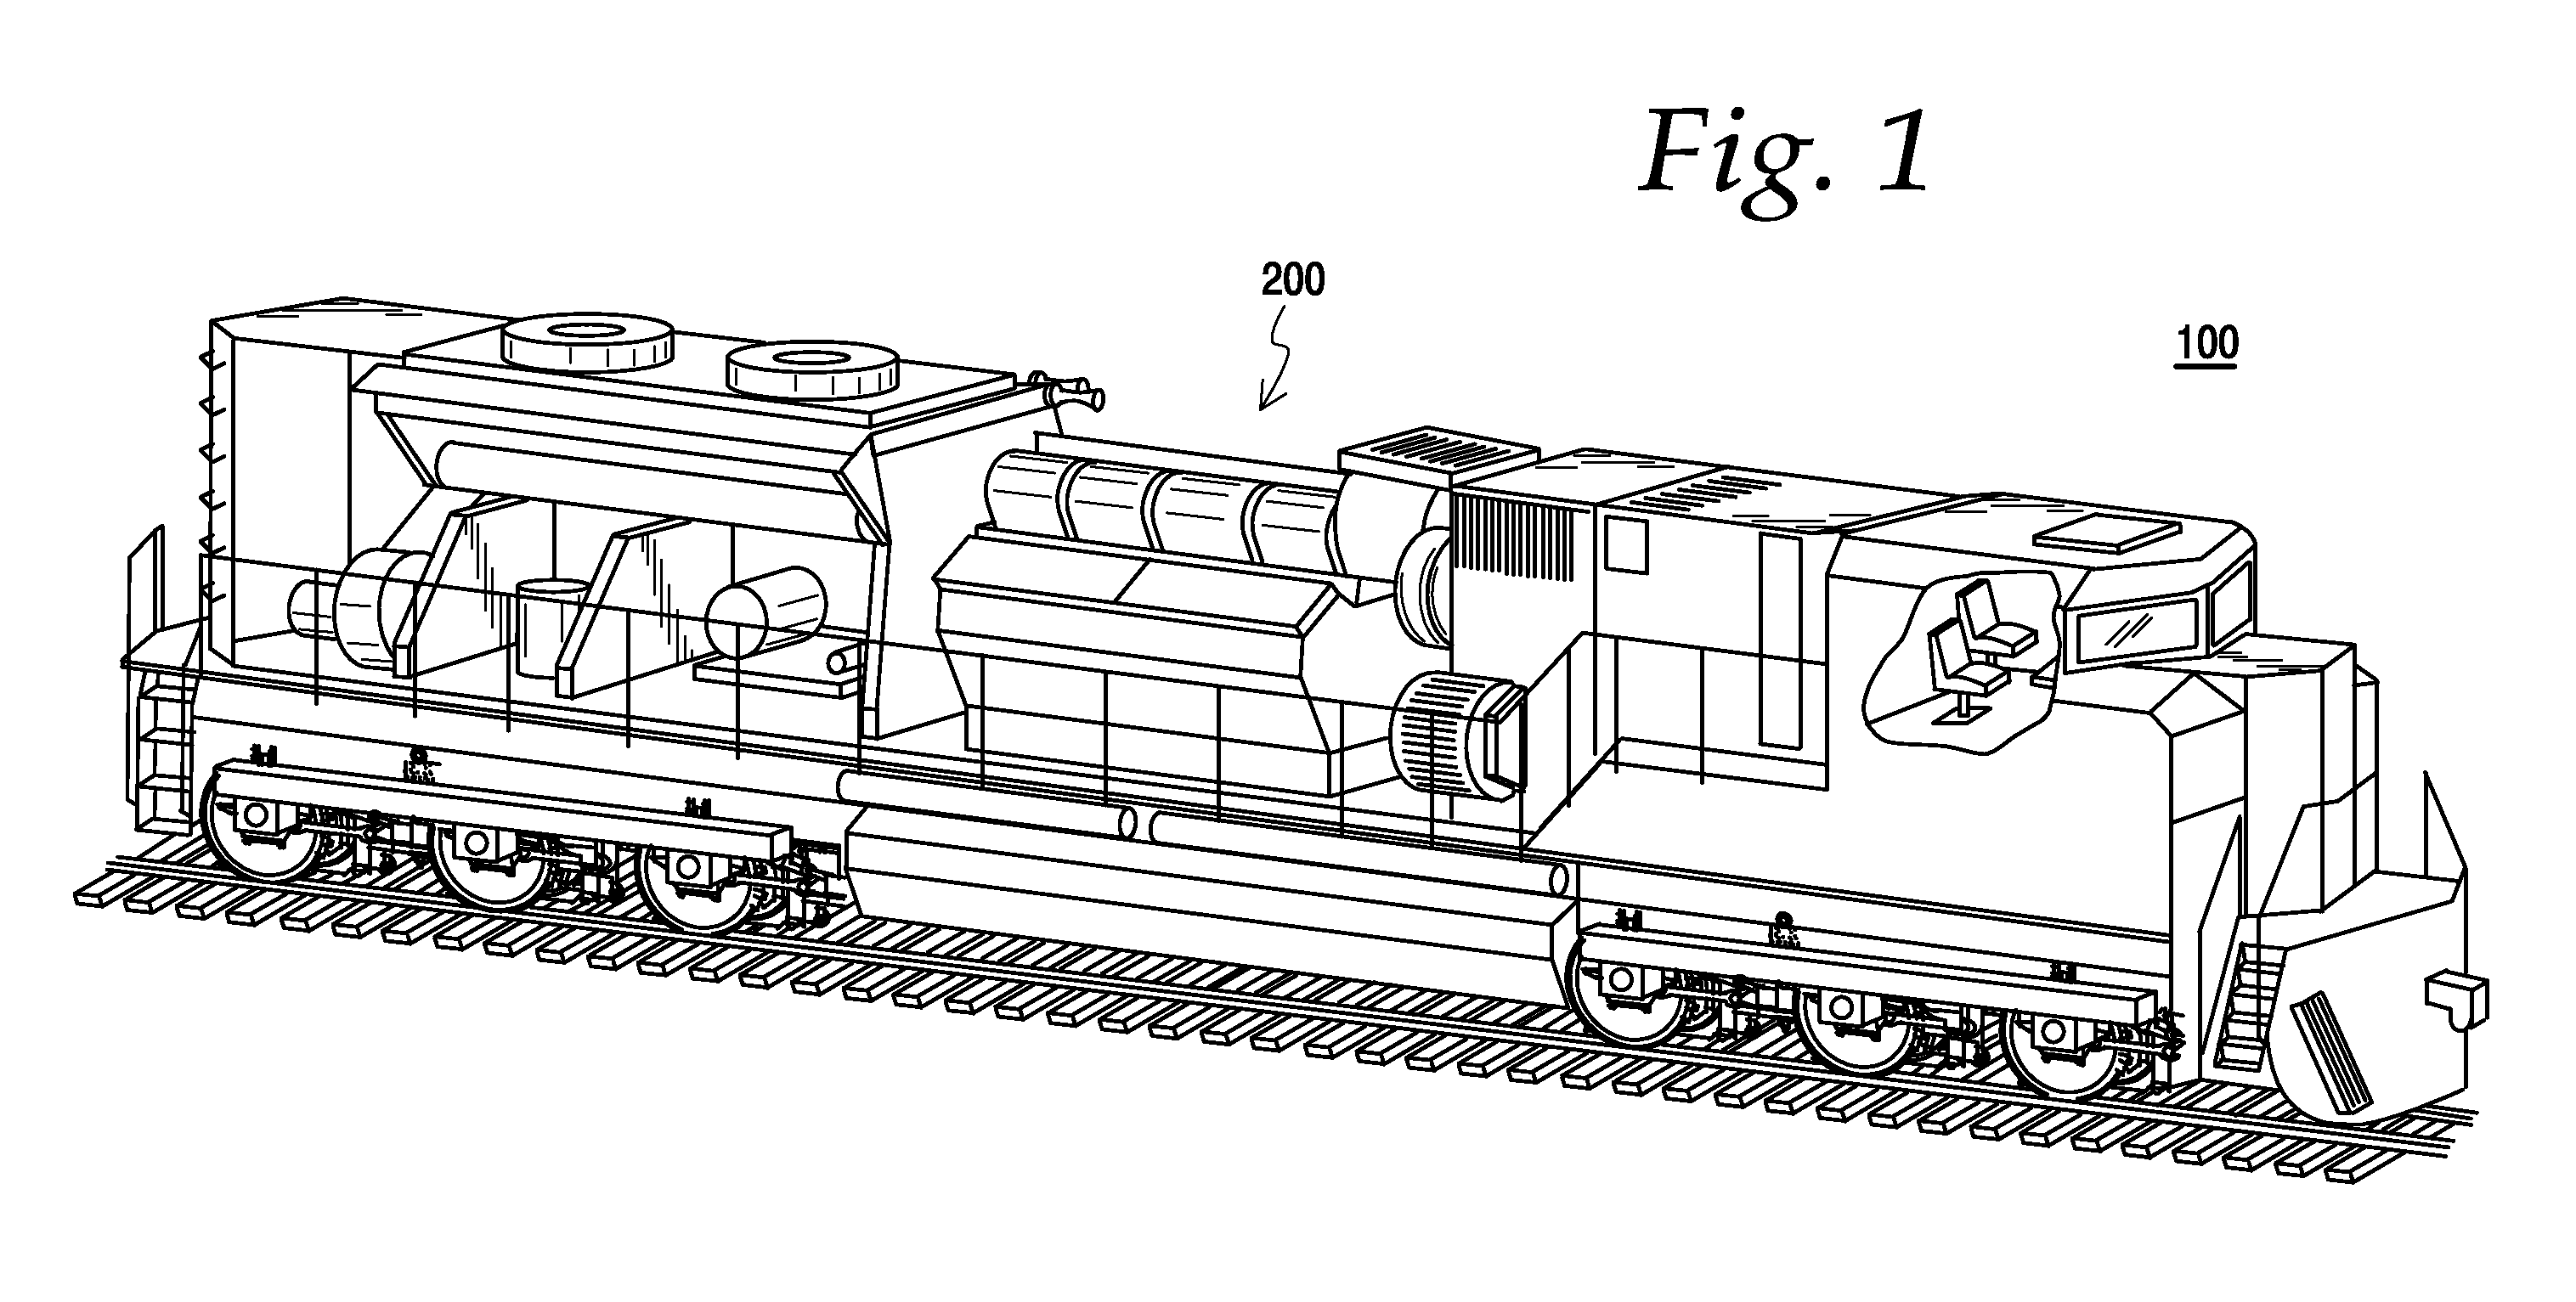 Engine exhaust valve timing and lift system for a two-stroke locomotive diesel engine having an egr system